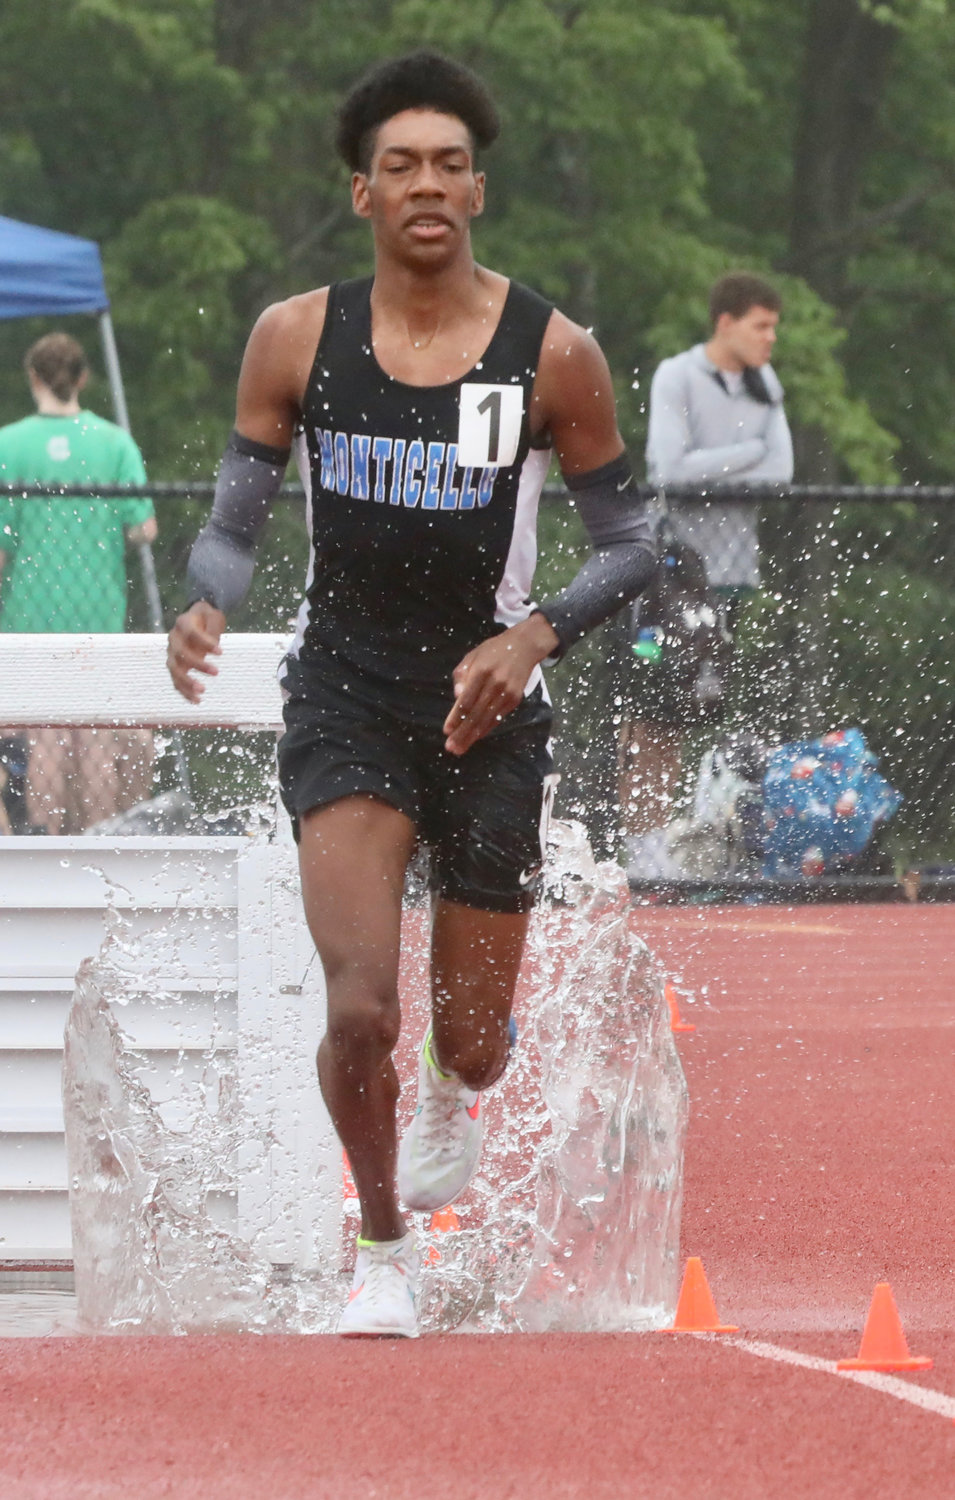 Evan Waterton took first in the 3000 Steeplechase at the OCIAA Championship in May. He also won the 1600 and the 3200 to help Monticello garner third place, its all time best finish at the event.